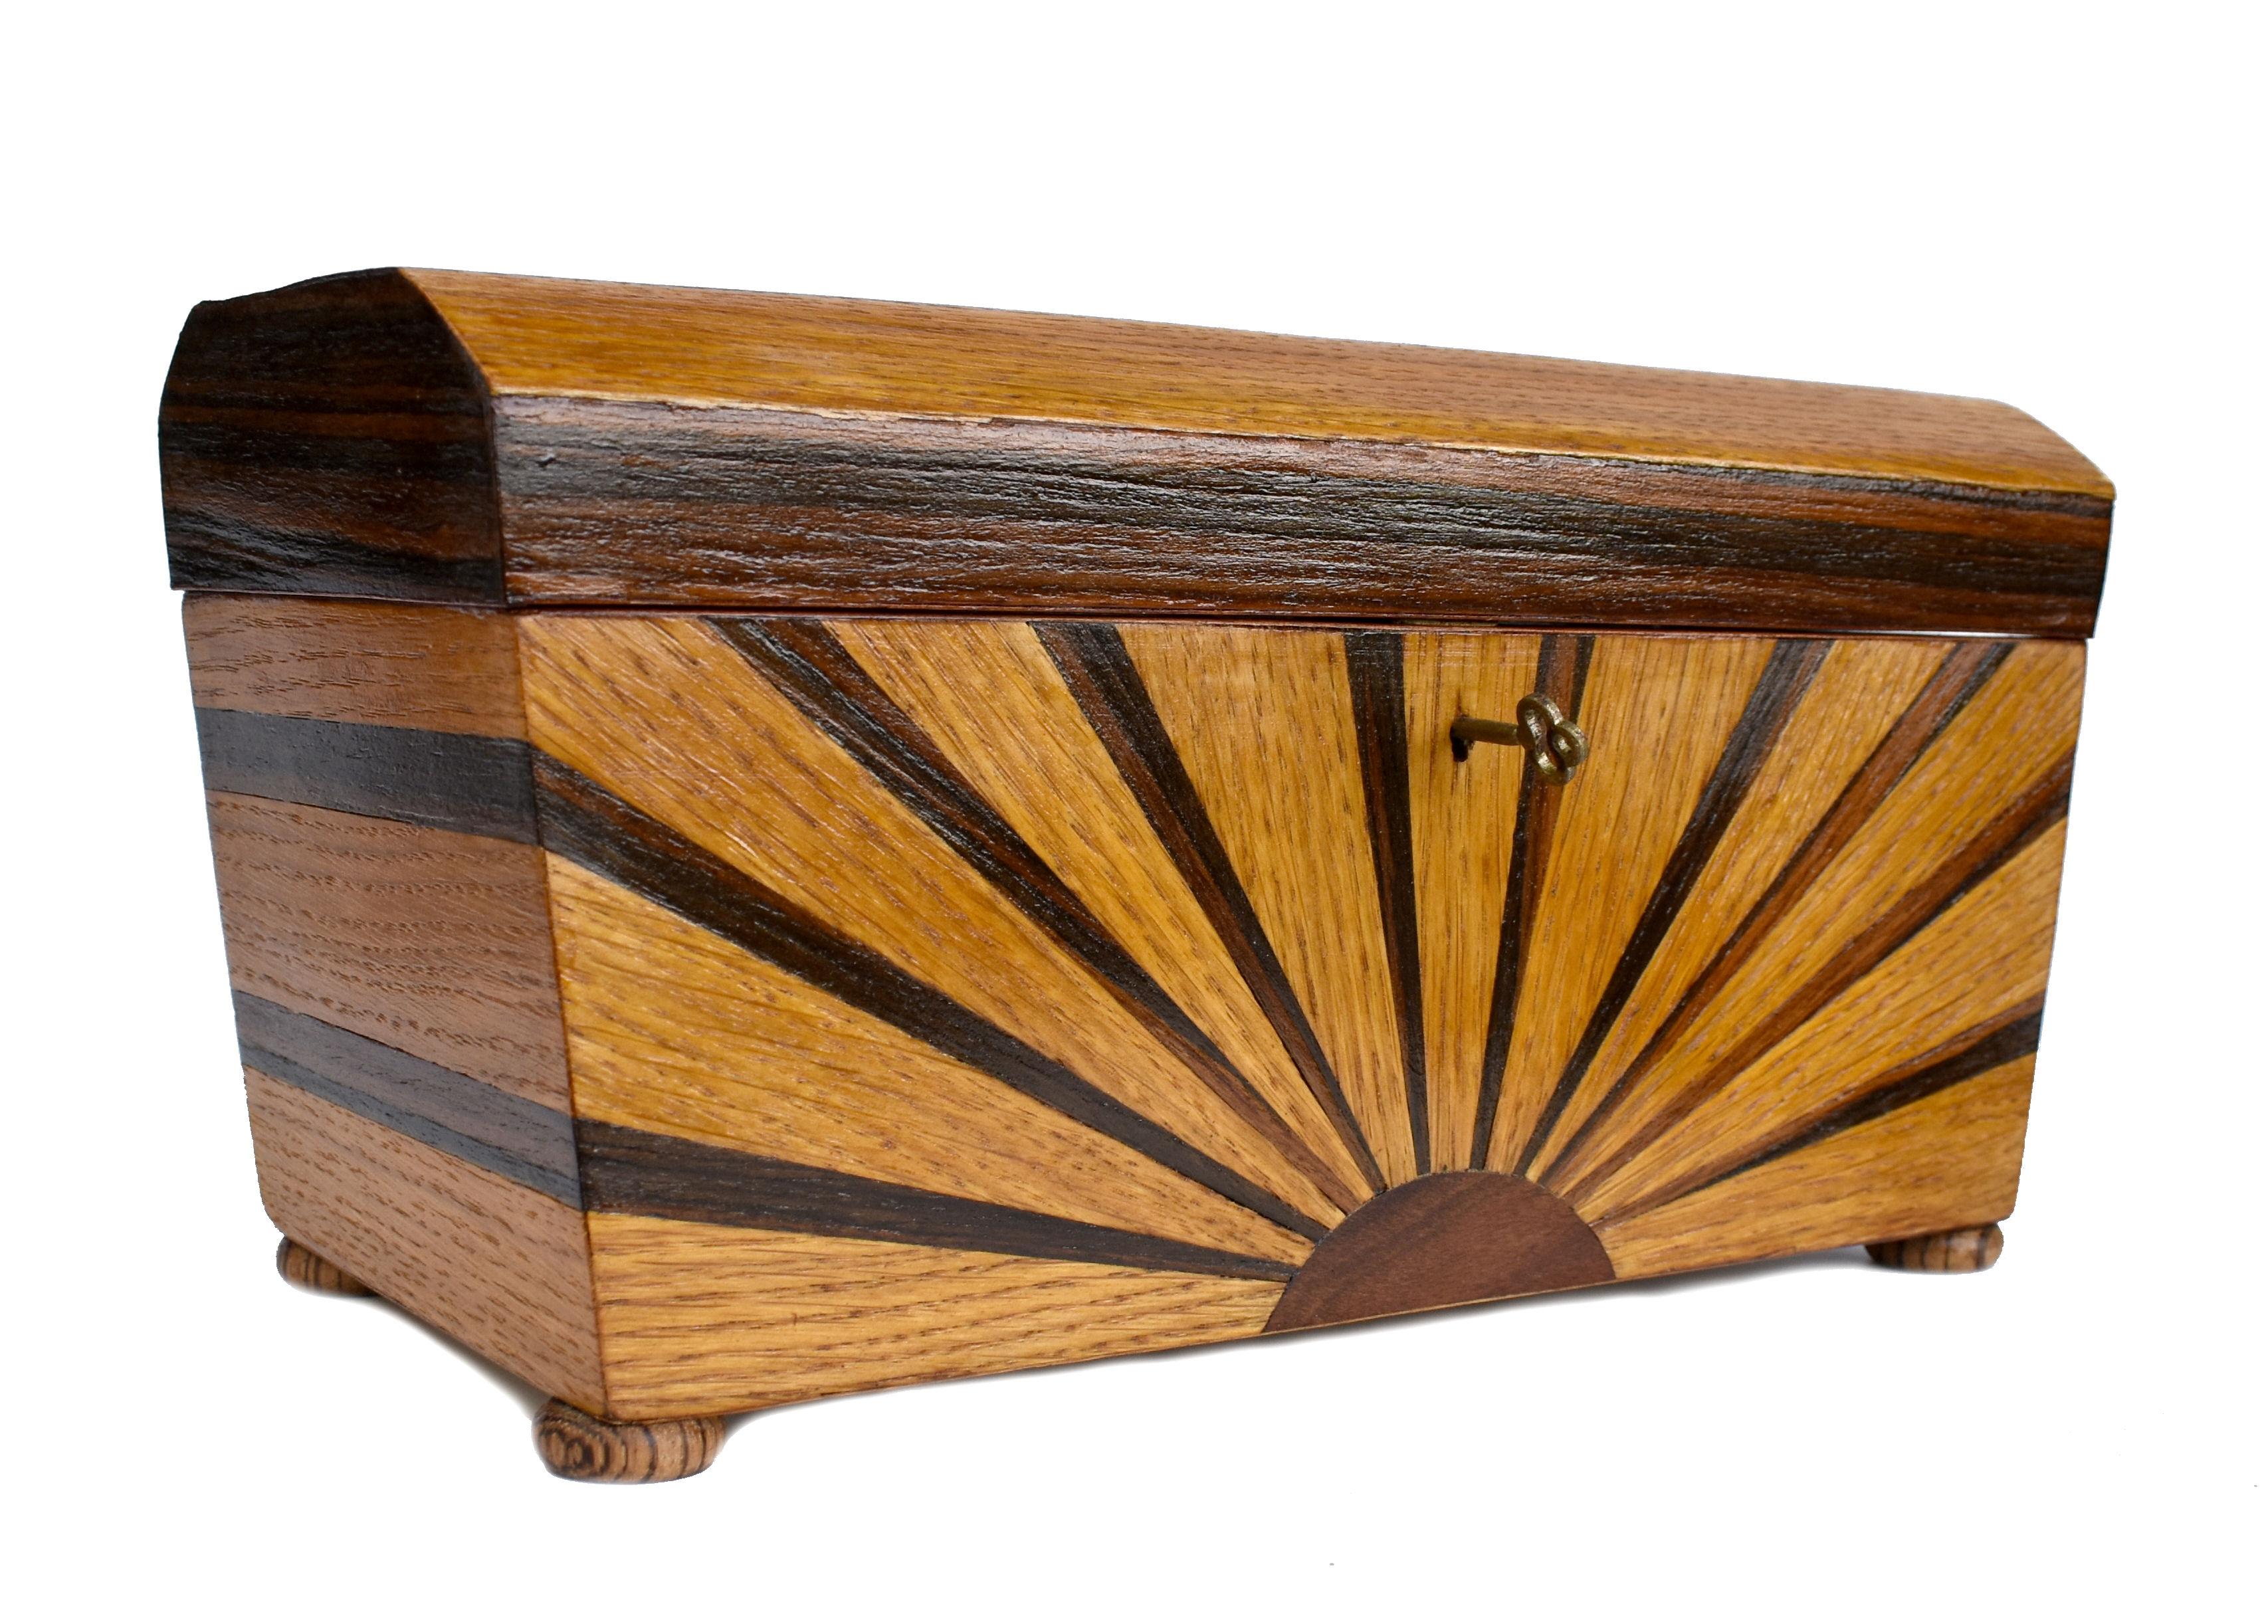 Art Deco Inlaid 'Sunray' Inlaid Tea Caddy Box with Key, c1930 In Good Condition For Sale In Devon, England